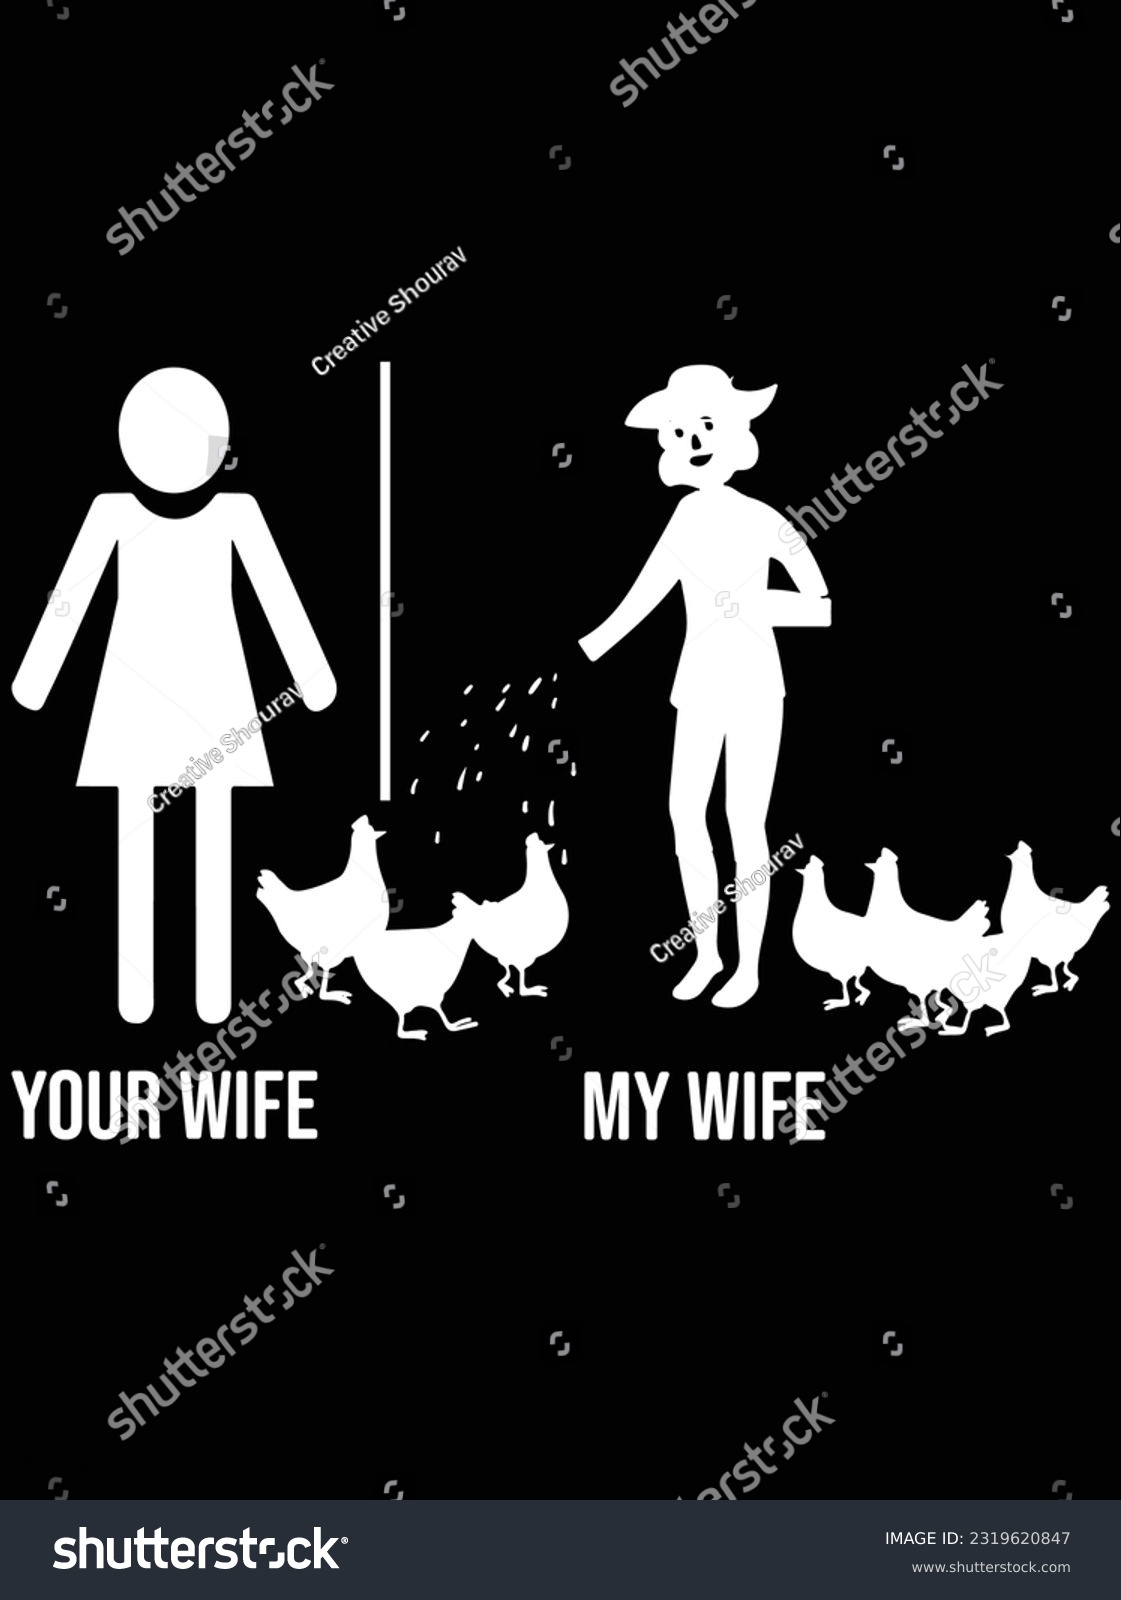 SVG of Your wife my wife chicken lady vector art design, eps file. design file for t-shirt. SVG, EPS cuttable design file svg